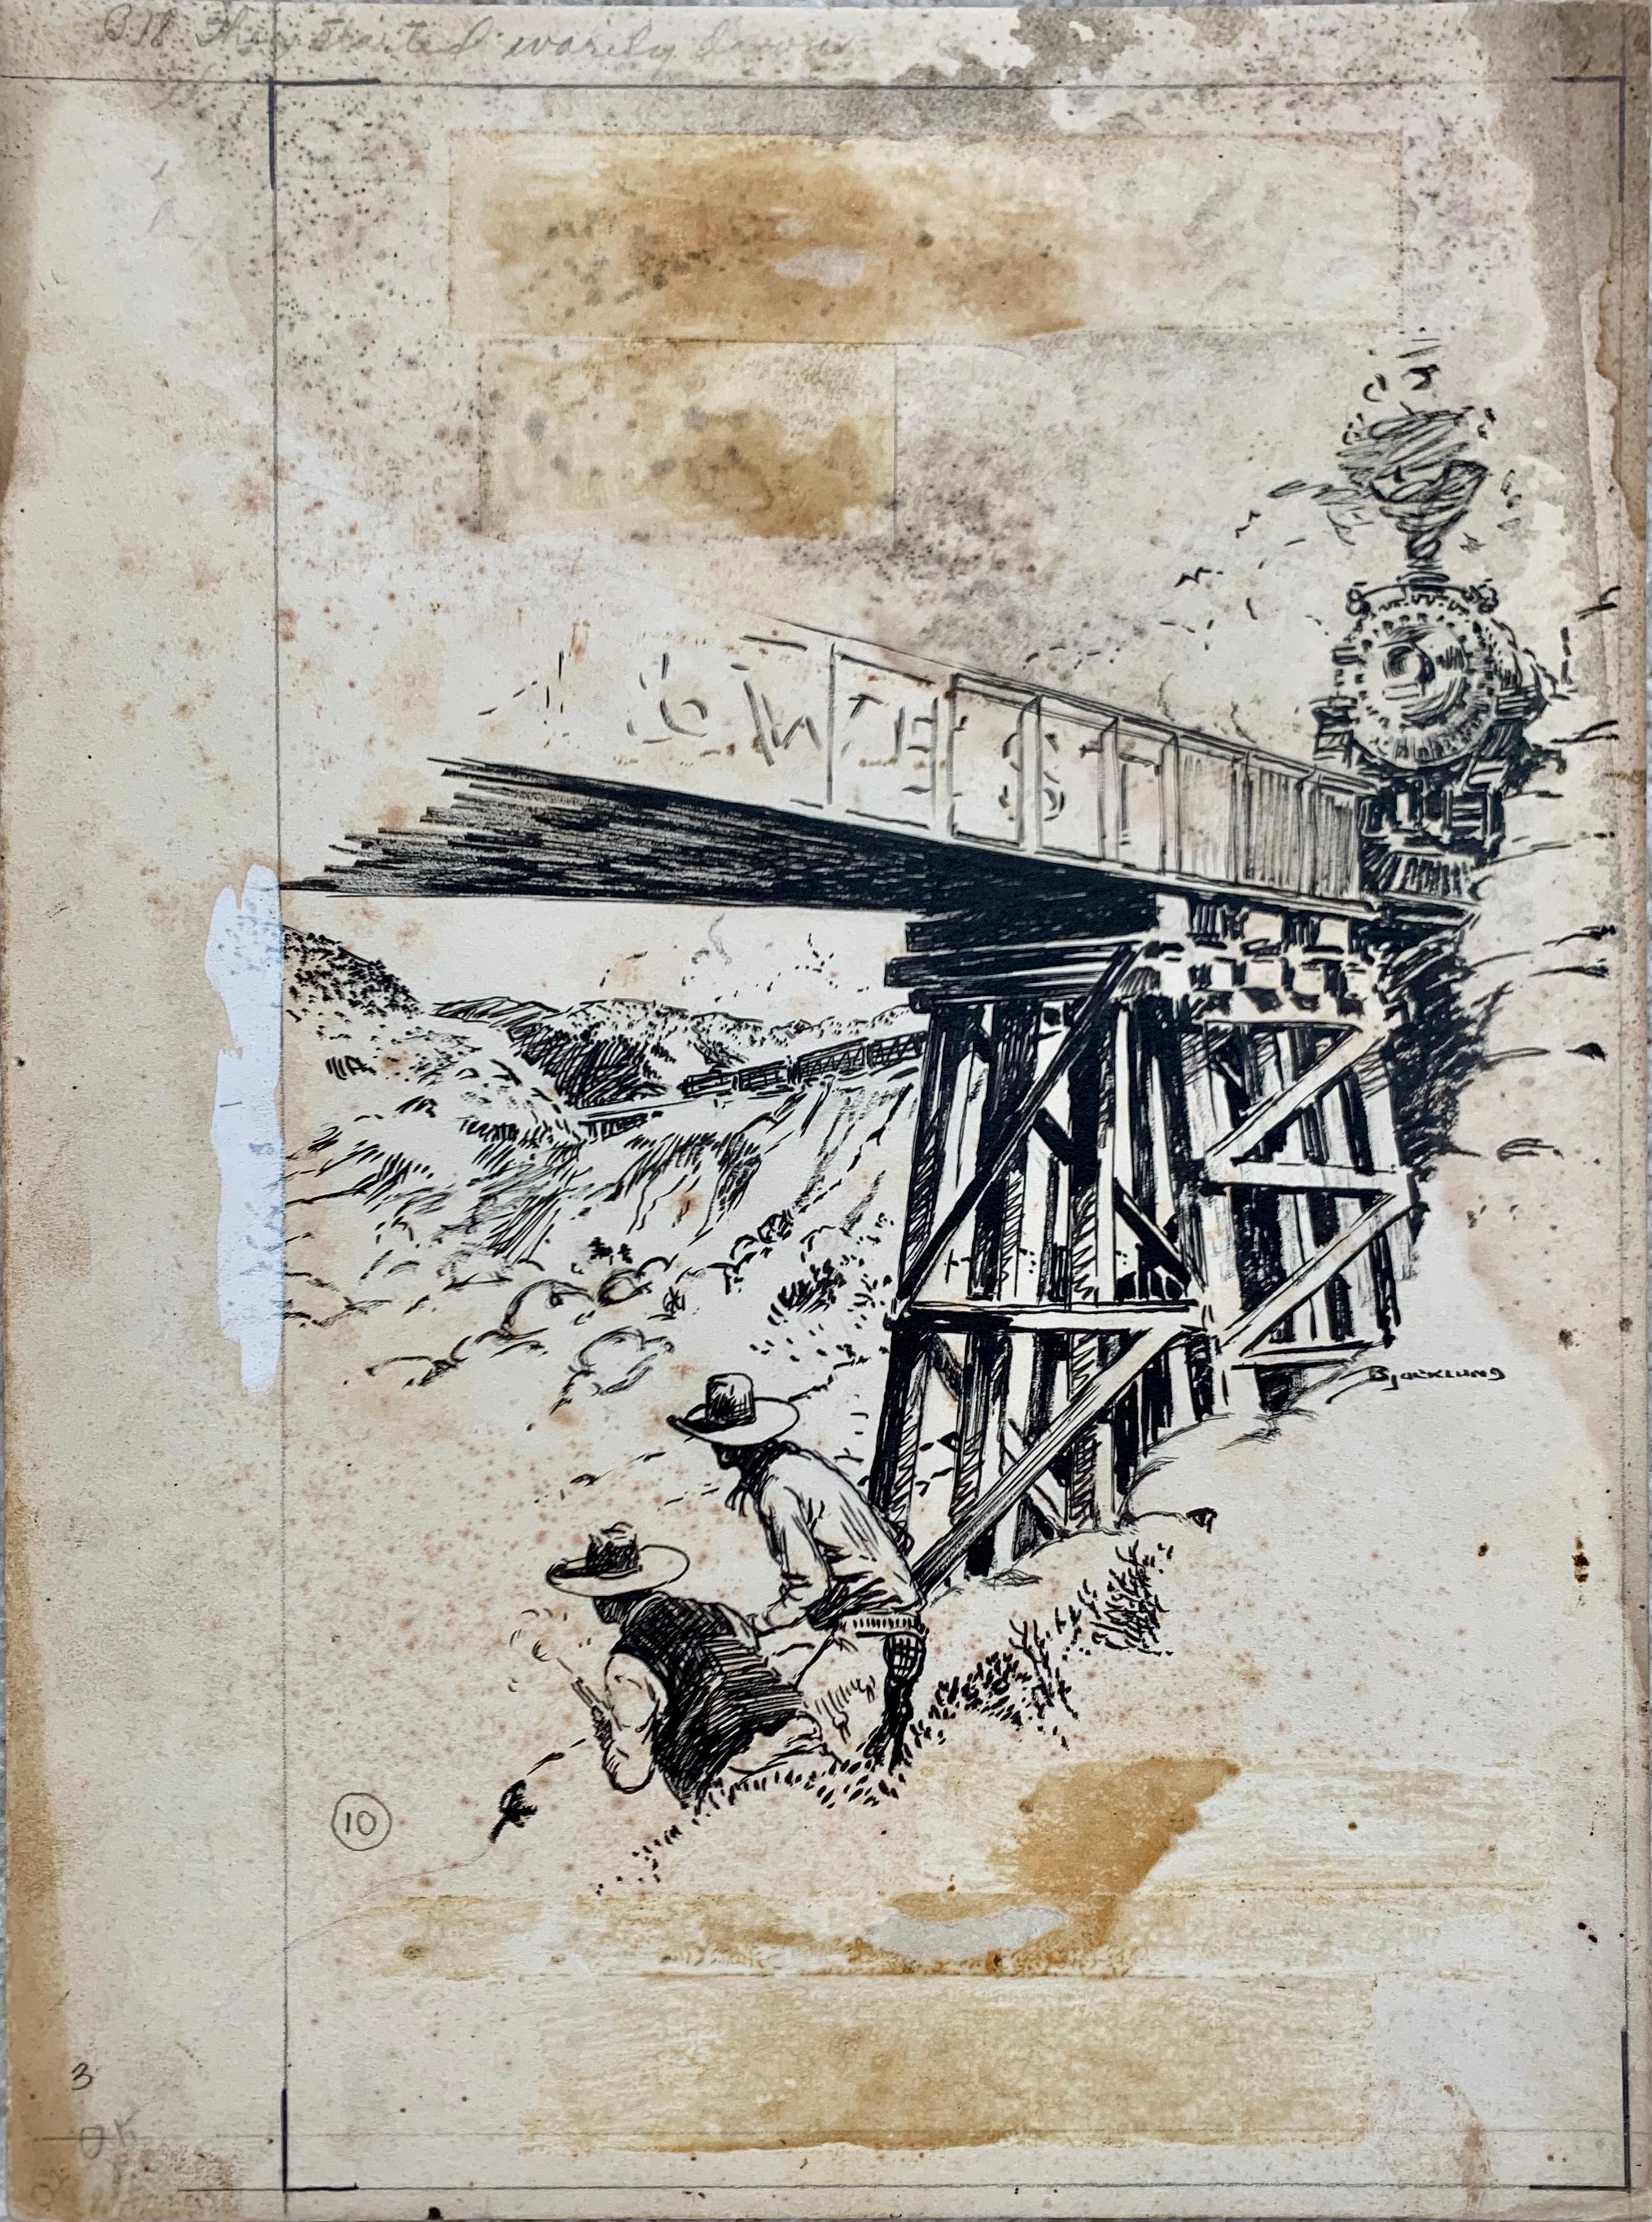 "A Gun Lawyer for CJ" by Swedish American pulp artist Lorence Bjorklund (1913 - 1978) is an ink drawing on illustration board representing what appears to be a gun battle under a viaduct somewhere in the "Wild West". 

Born in Minnesota, Bjorklund